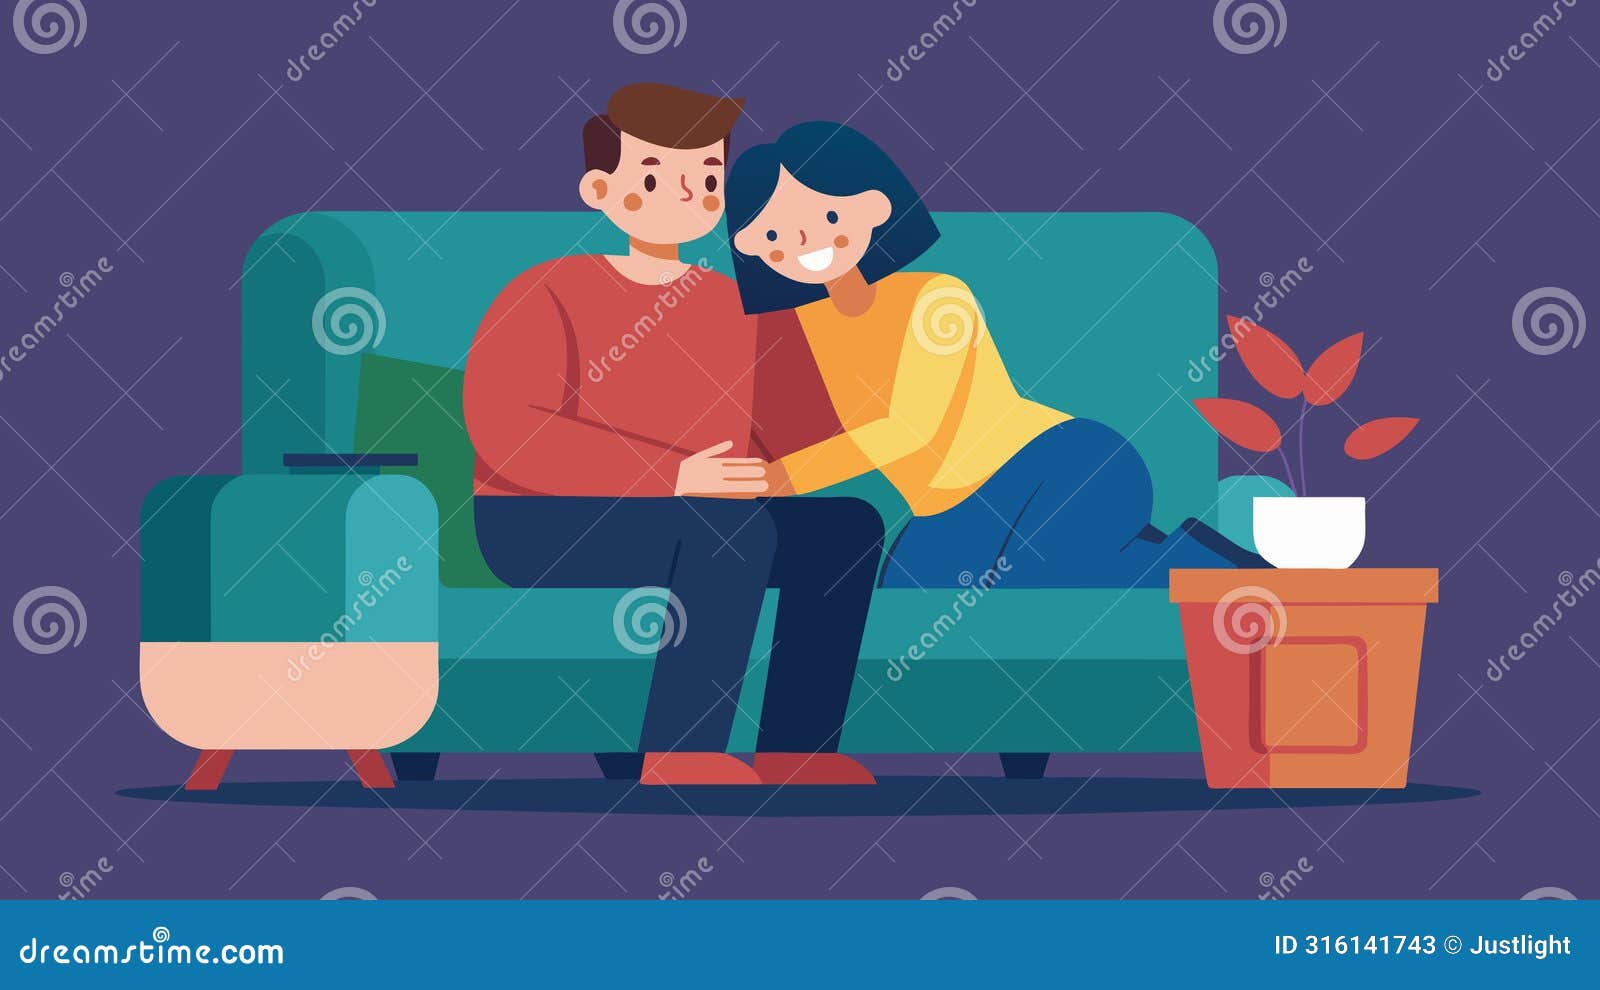 as they cuddled on the couch savoring their favorite movie they whispered sweet words of gratitude for the love that had